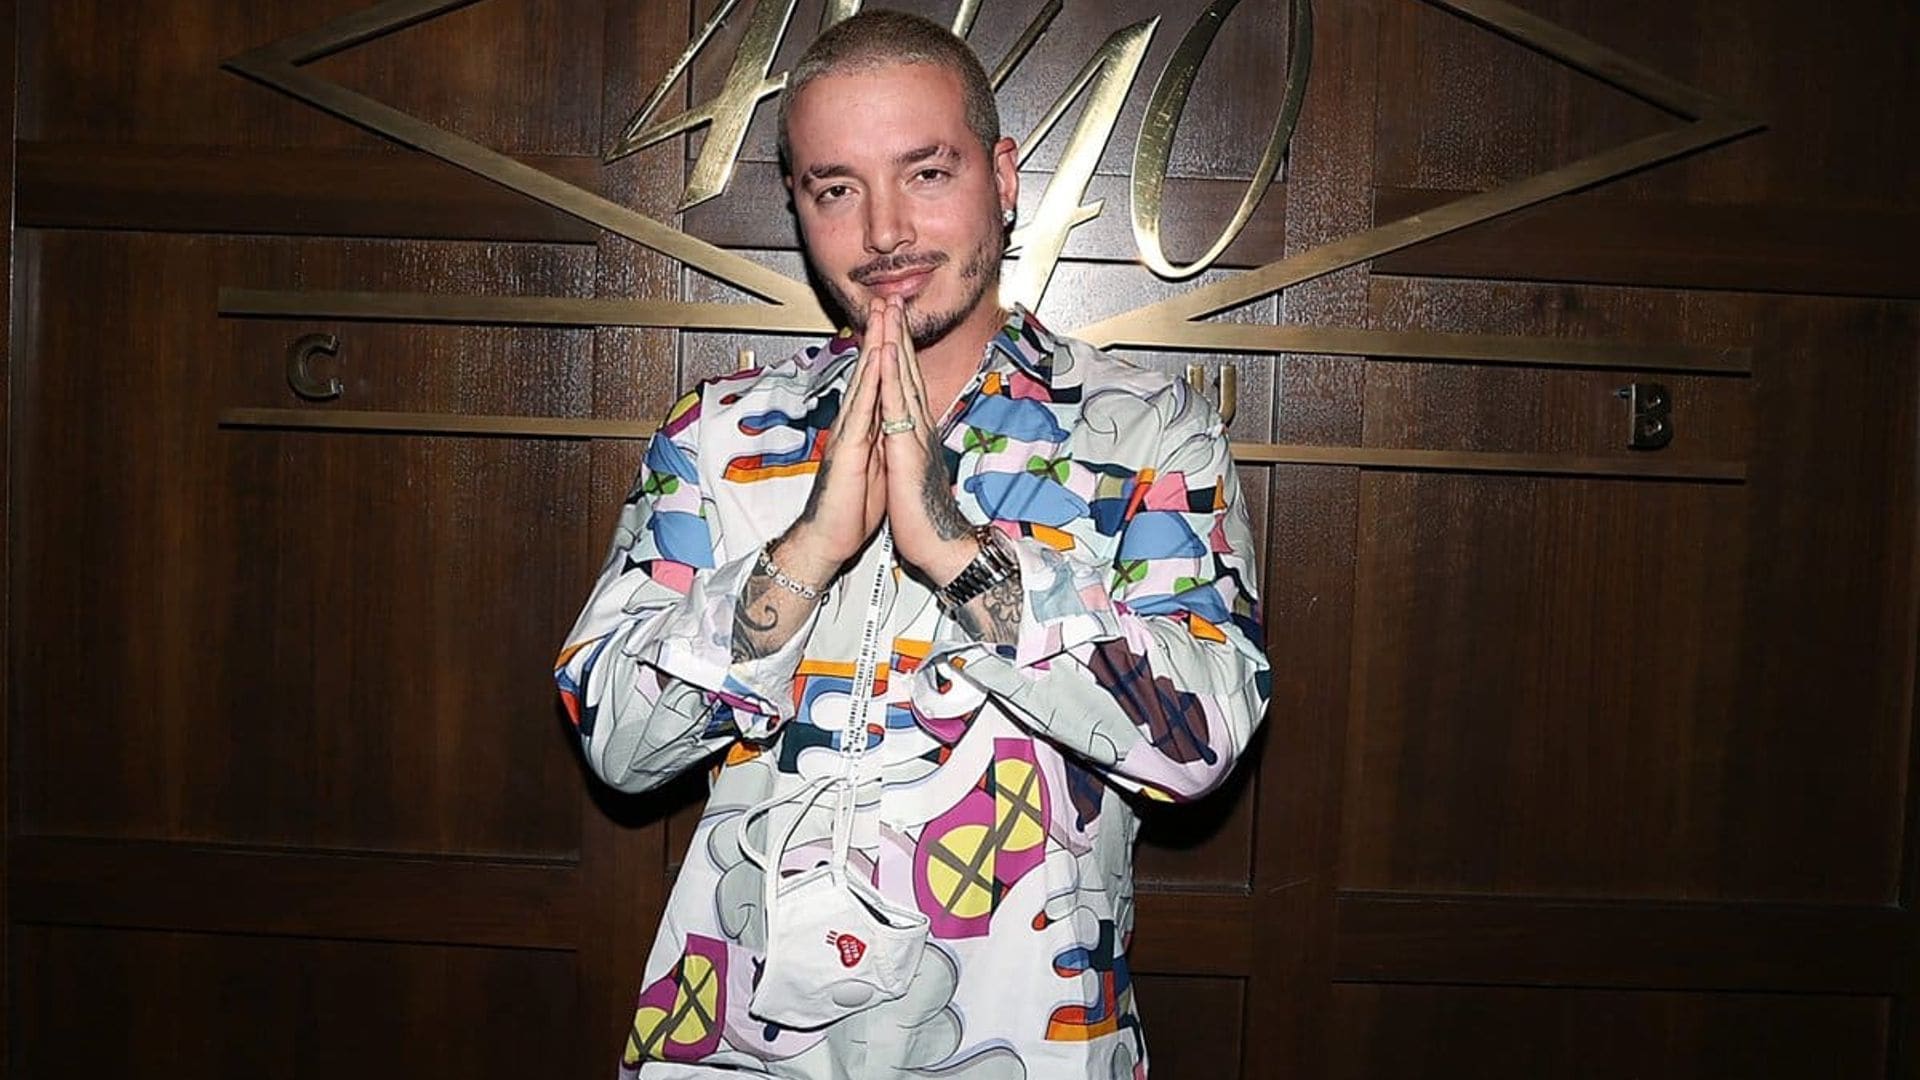 J Balvin is taking his NEON Experience to Mexico! The star lineup includes Rauw Alejandro, Sebastian Yatra, and more